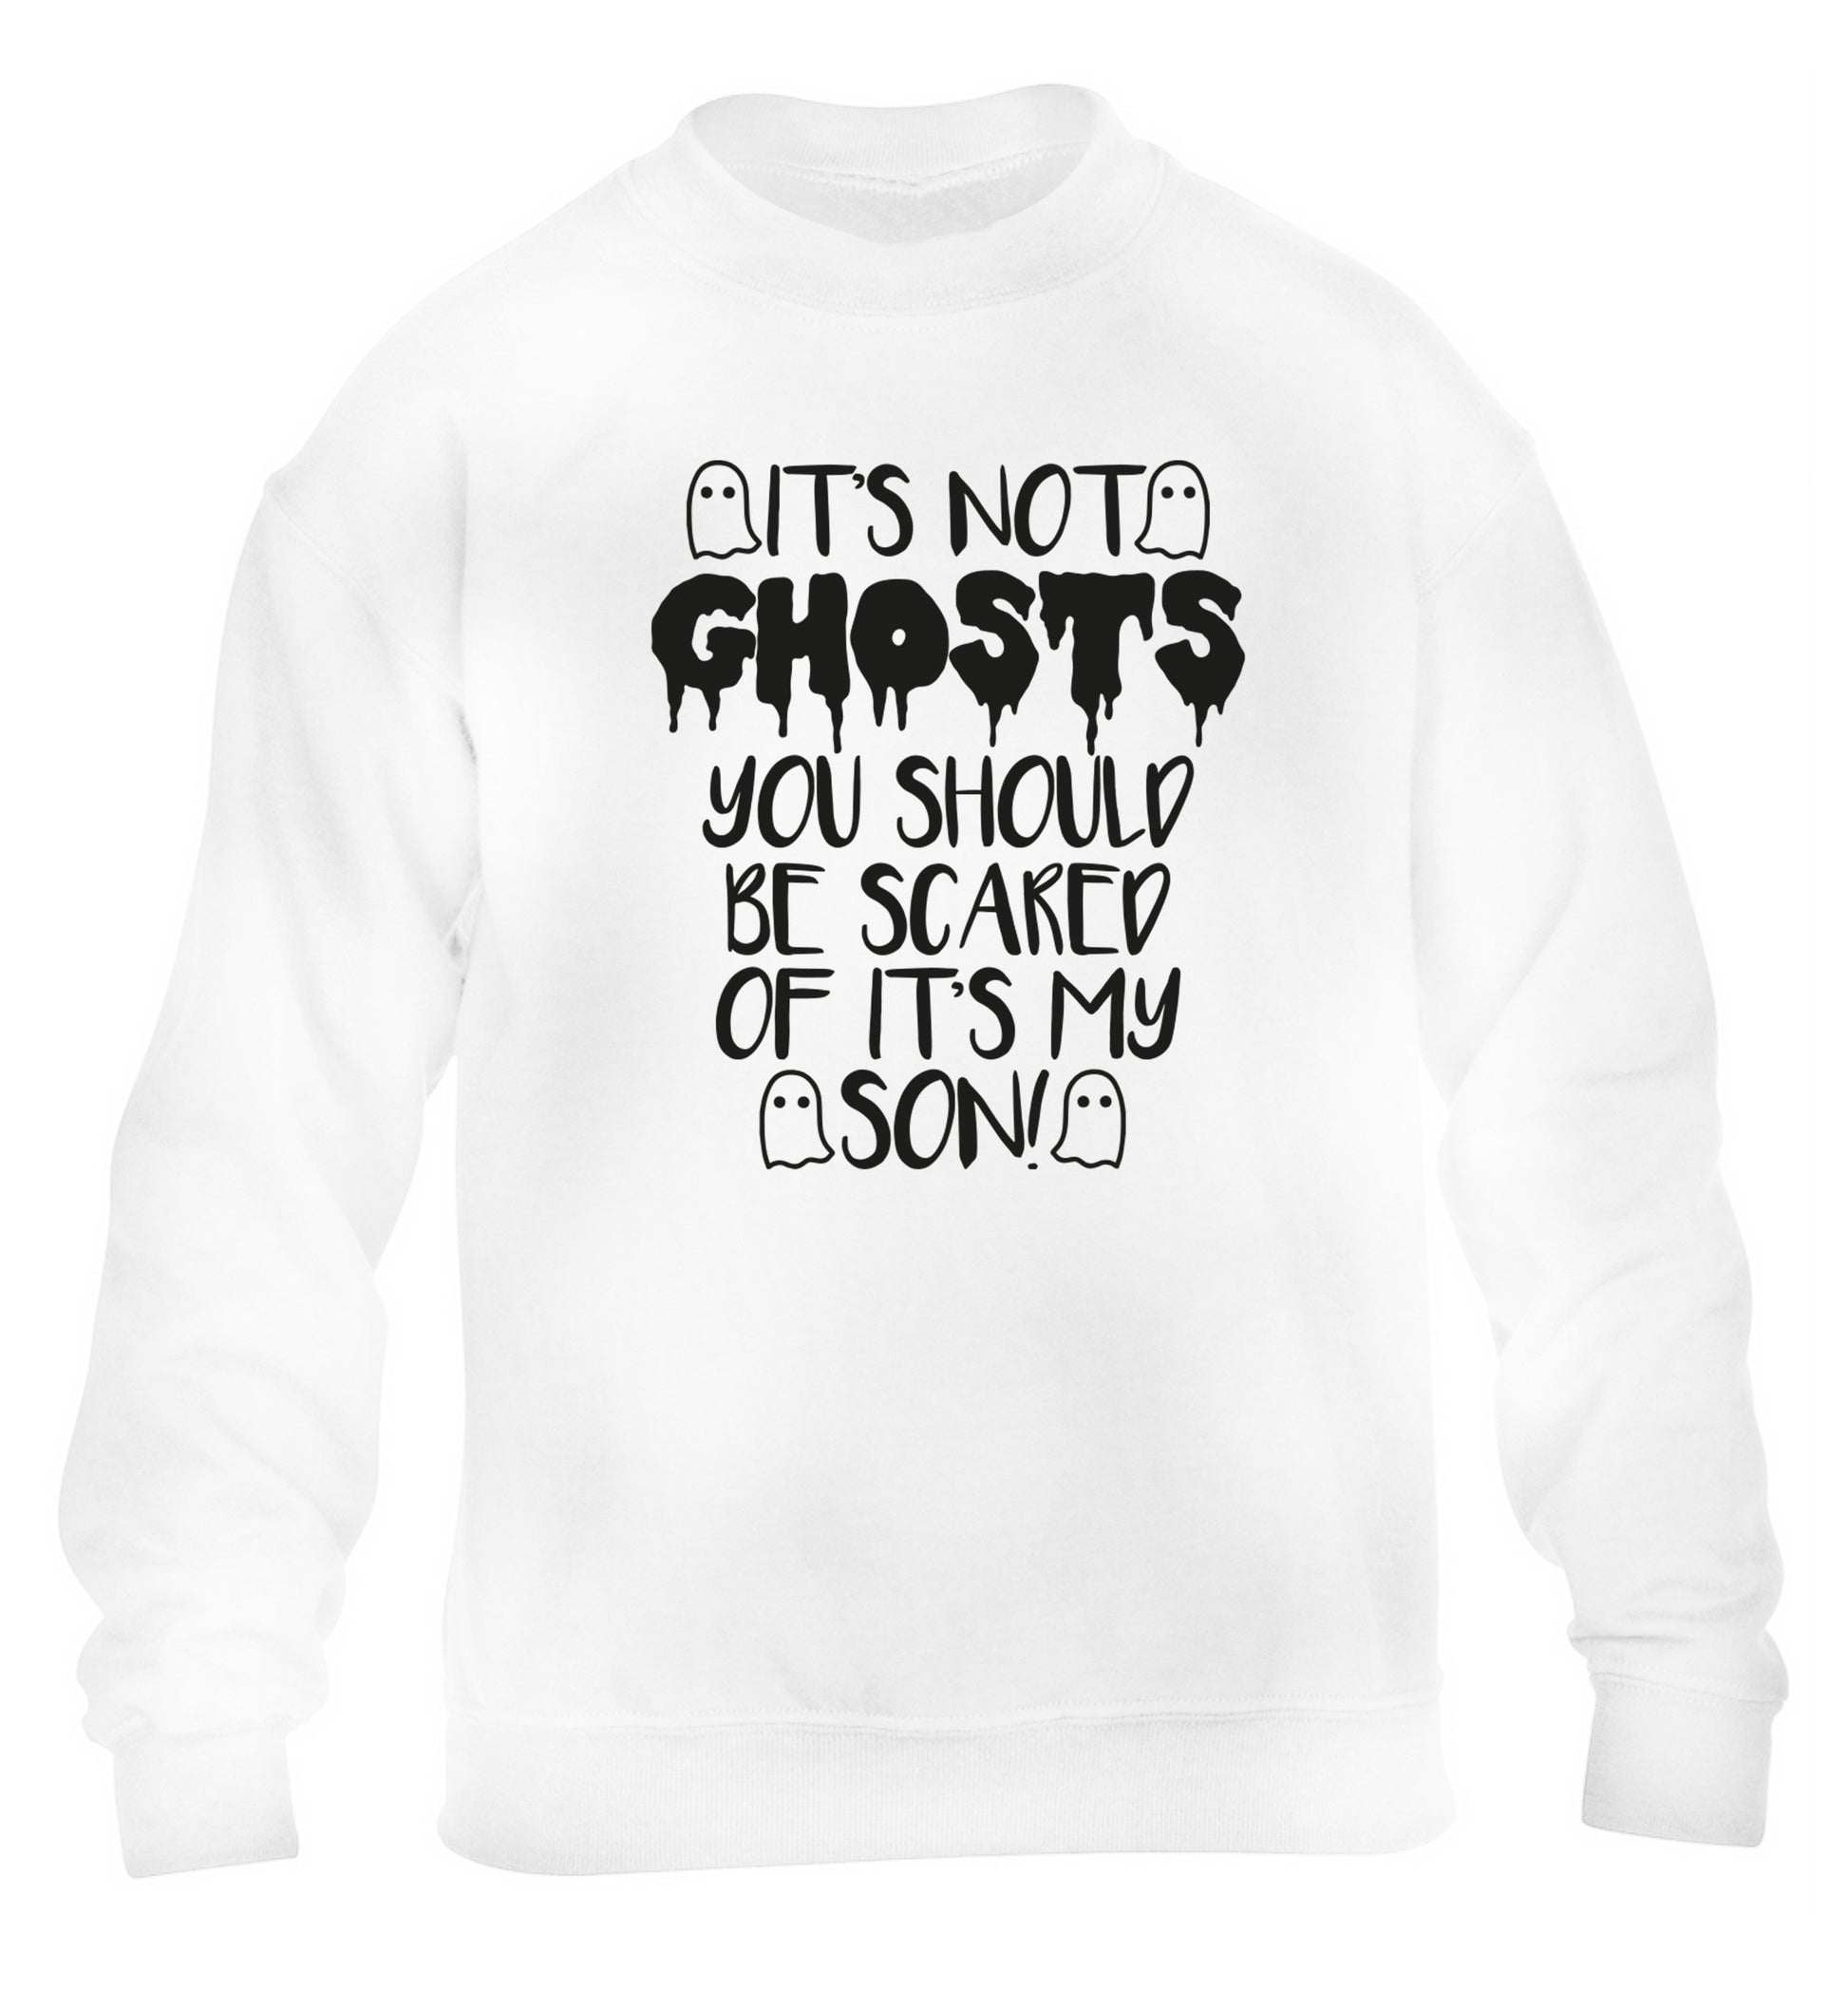 It's not ghosts you should be scared of it's my son! children's white sweater 12-14 Years